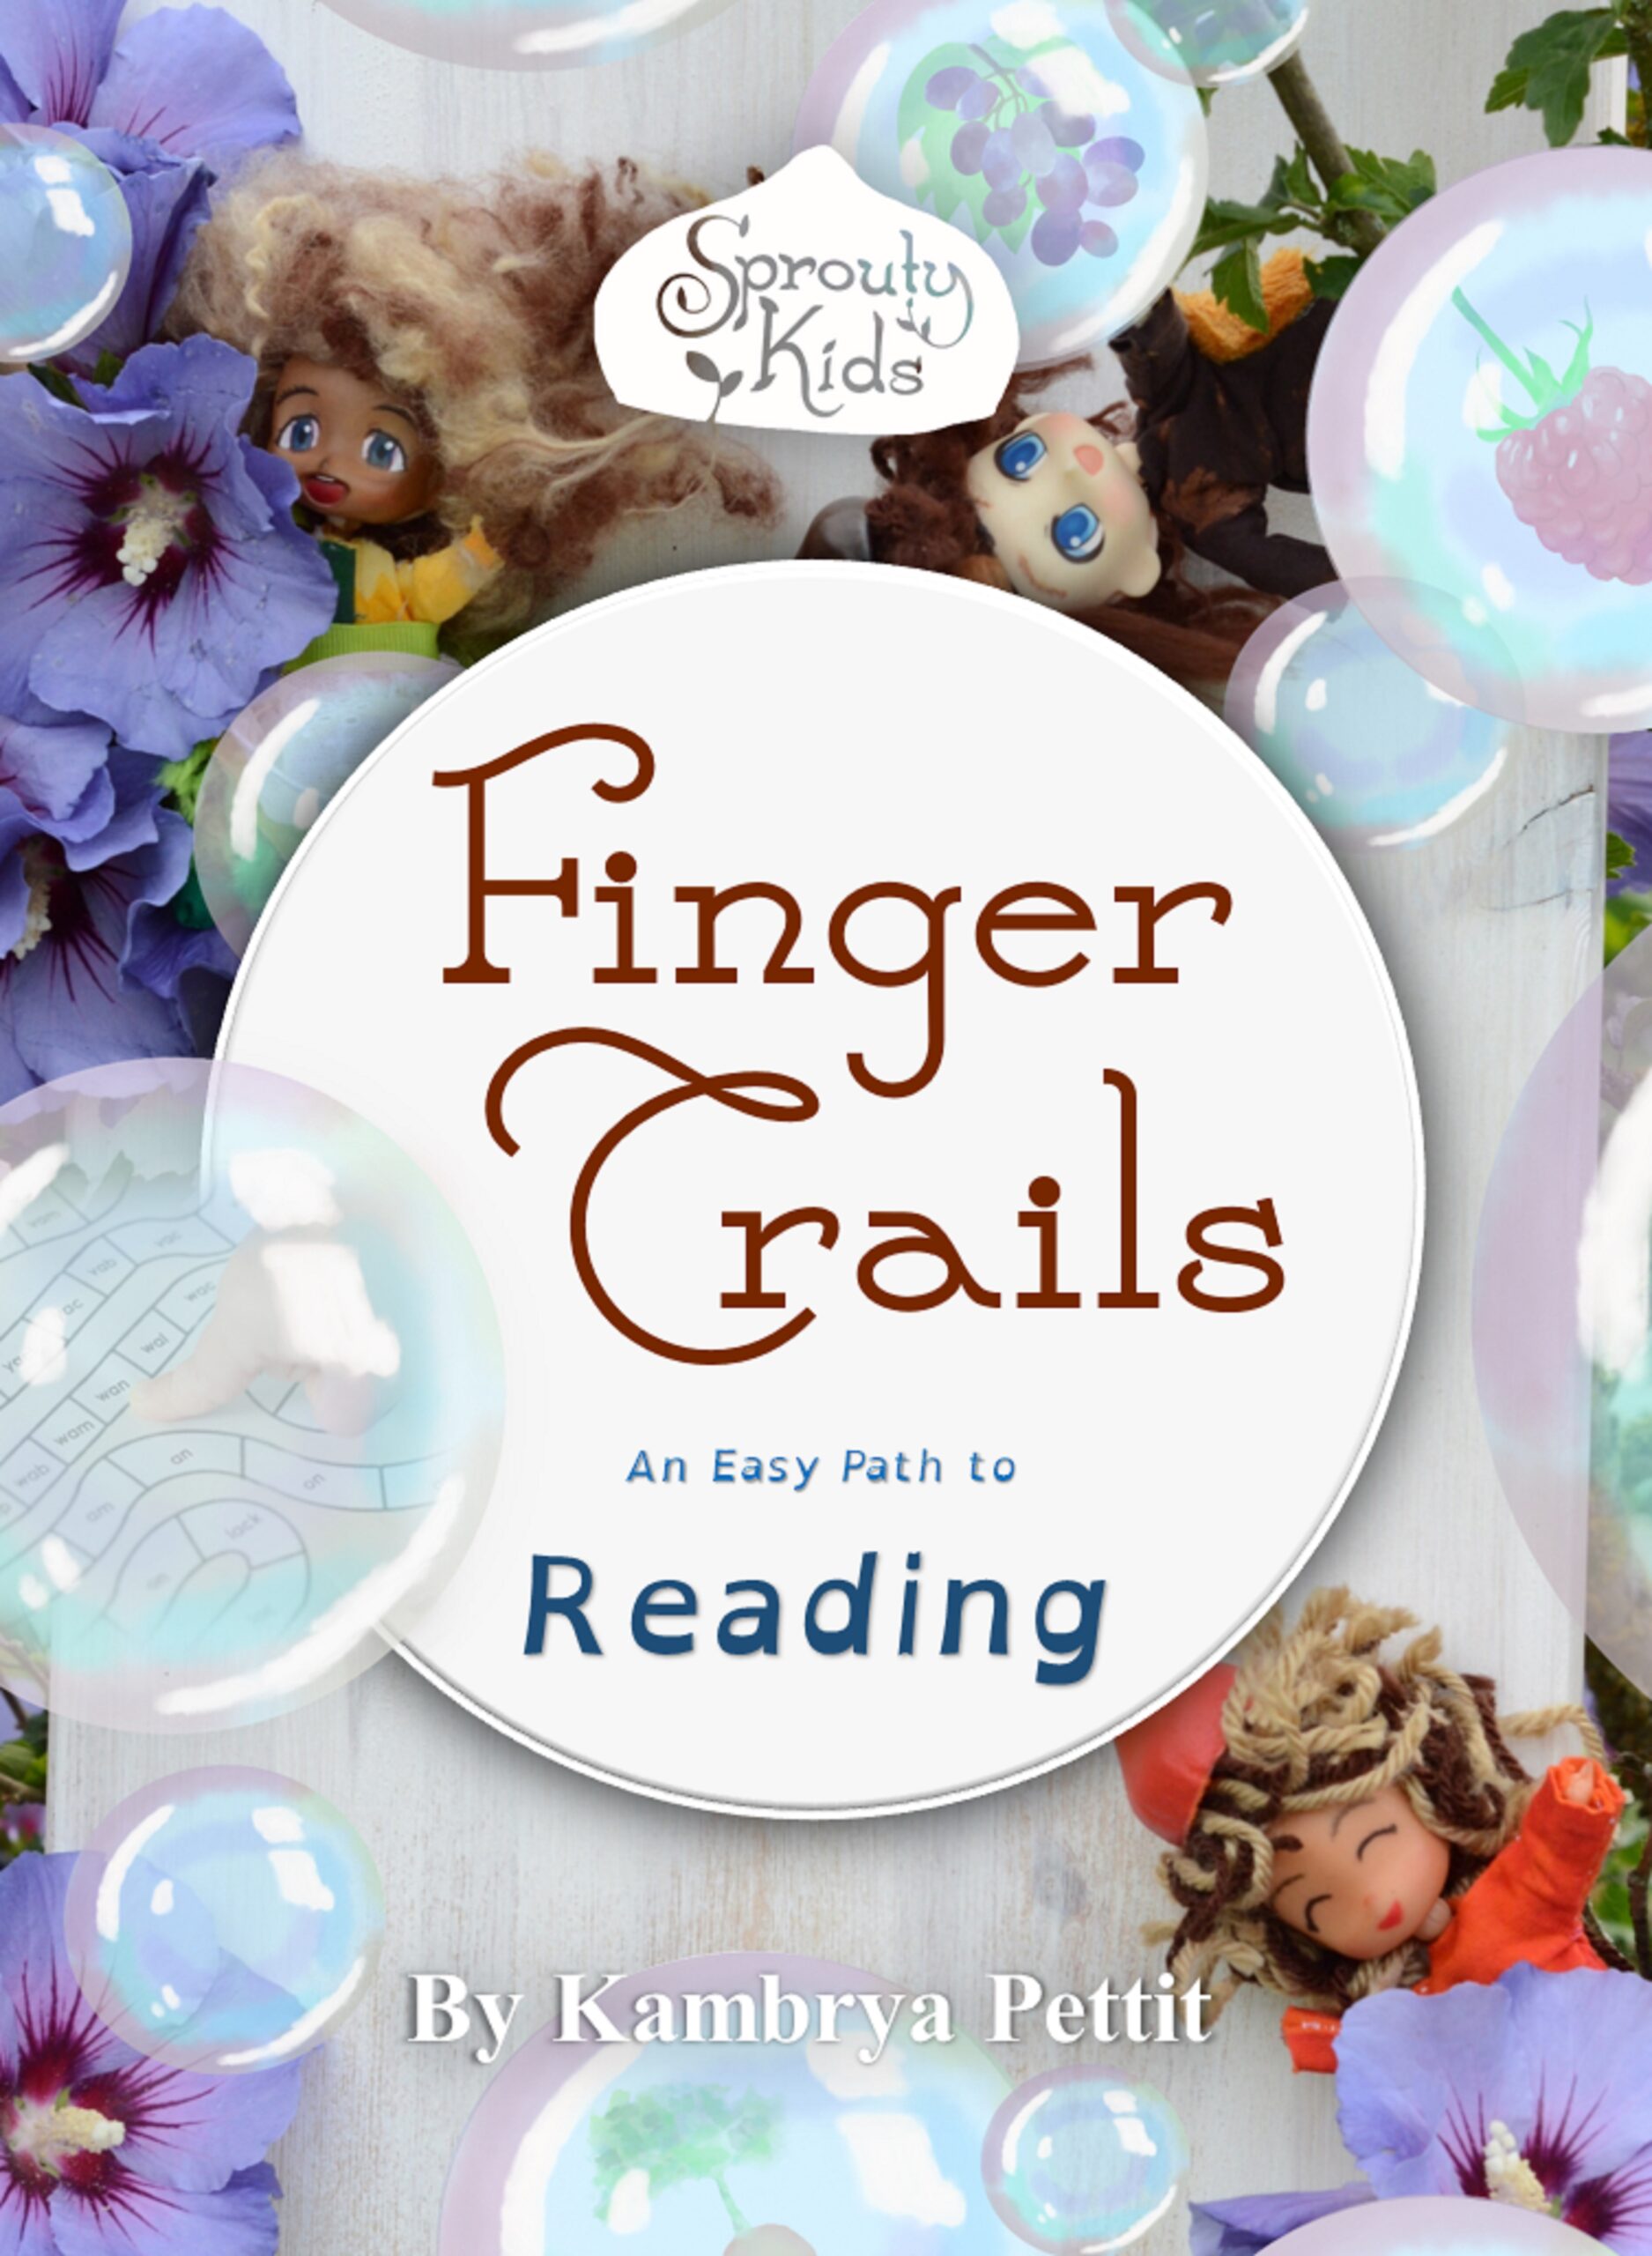 FREE Sprouty Kids Finger Trails - An Easy Path to Reading printable/digital lesson book!